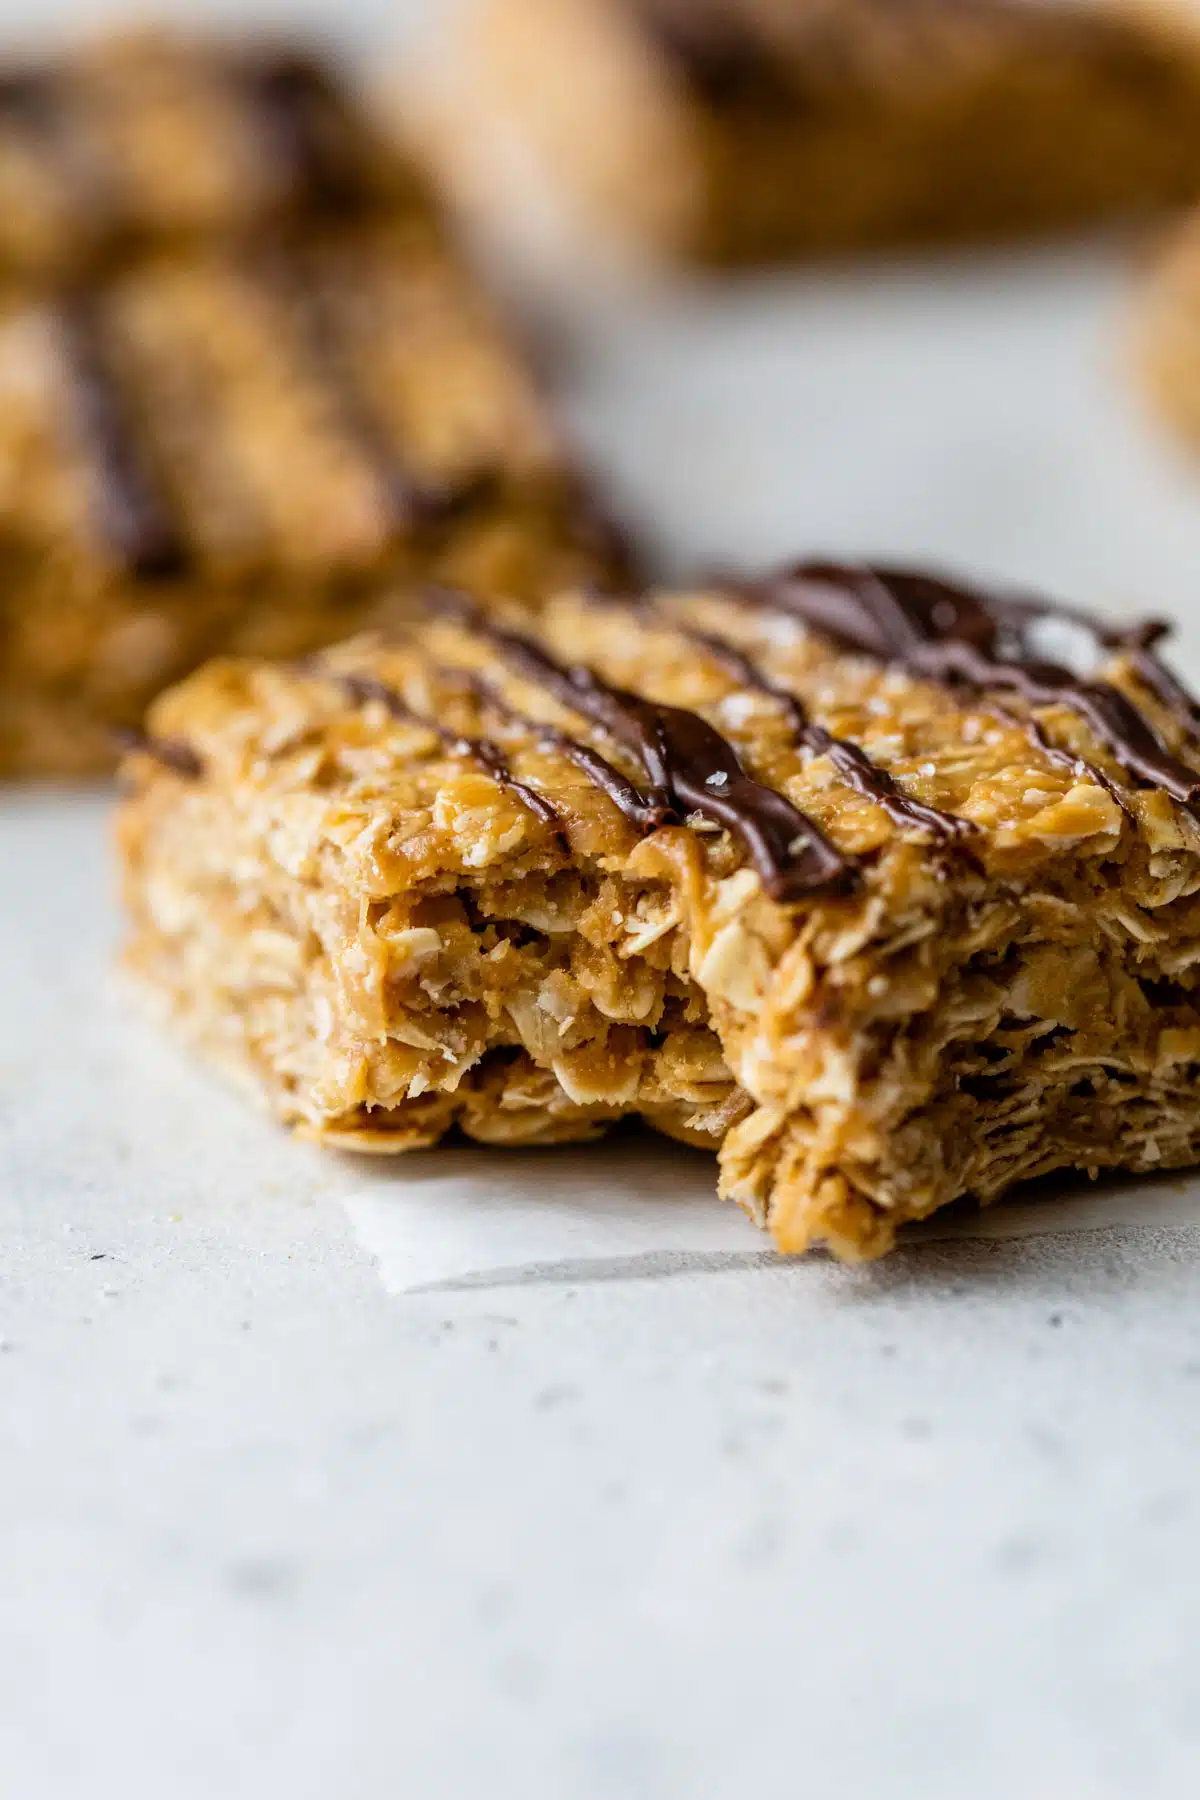 side view of a peanut butter oatmeal bar with melted chocolate drizzled over top with a bite taken out